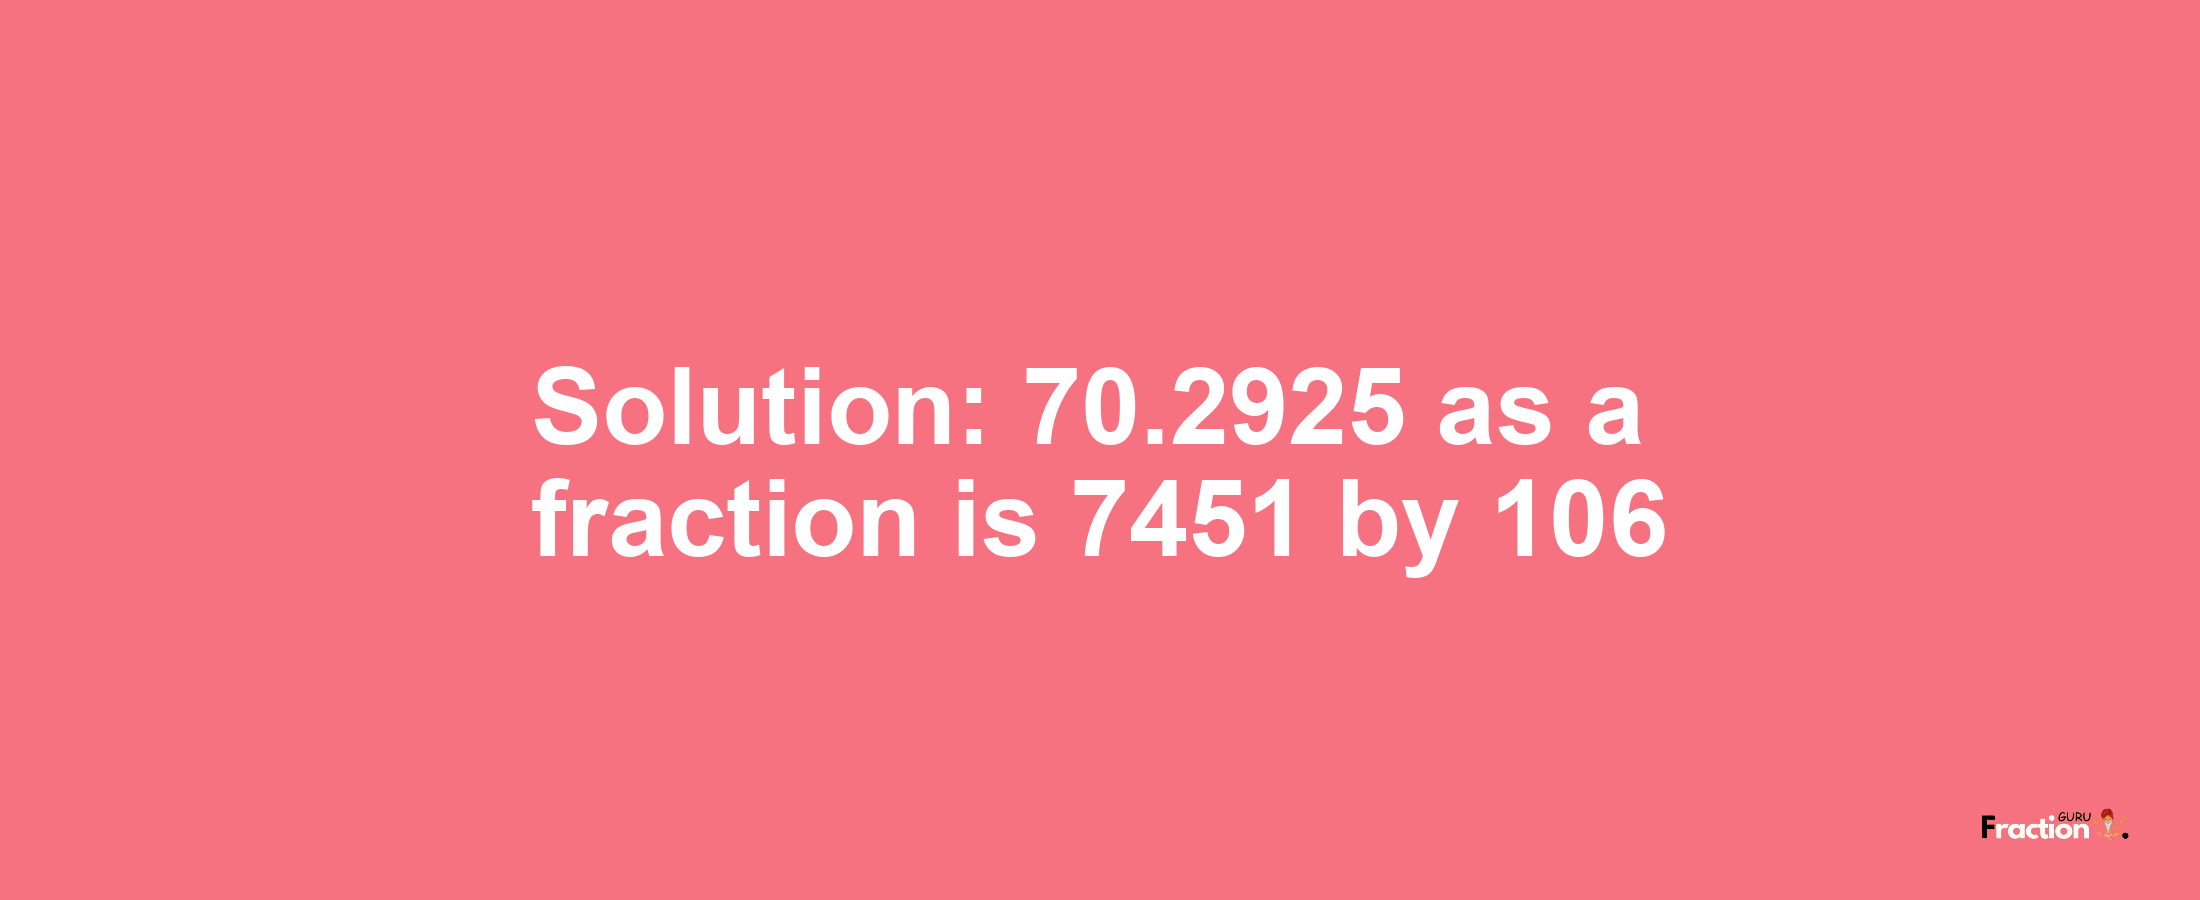 Solution:70.2925 as a fraction is 7451/106